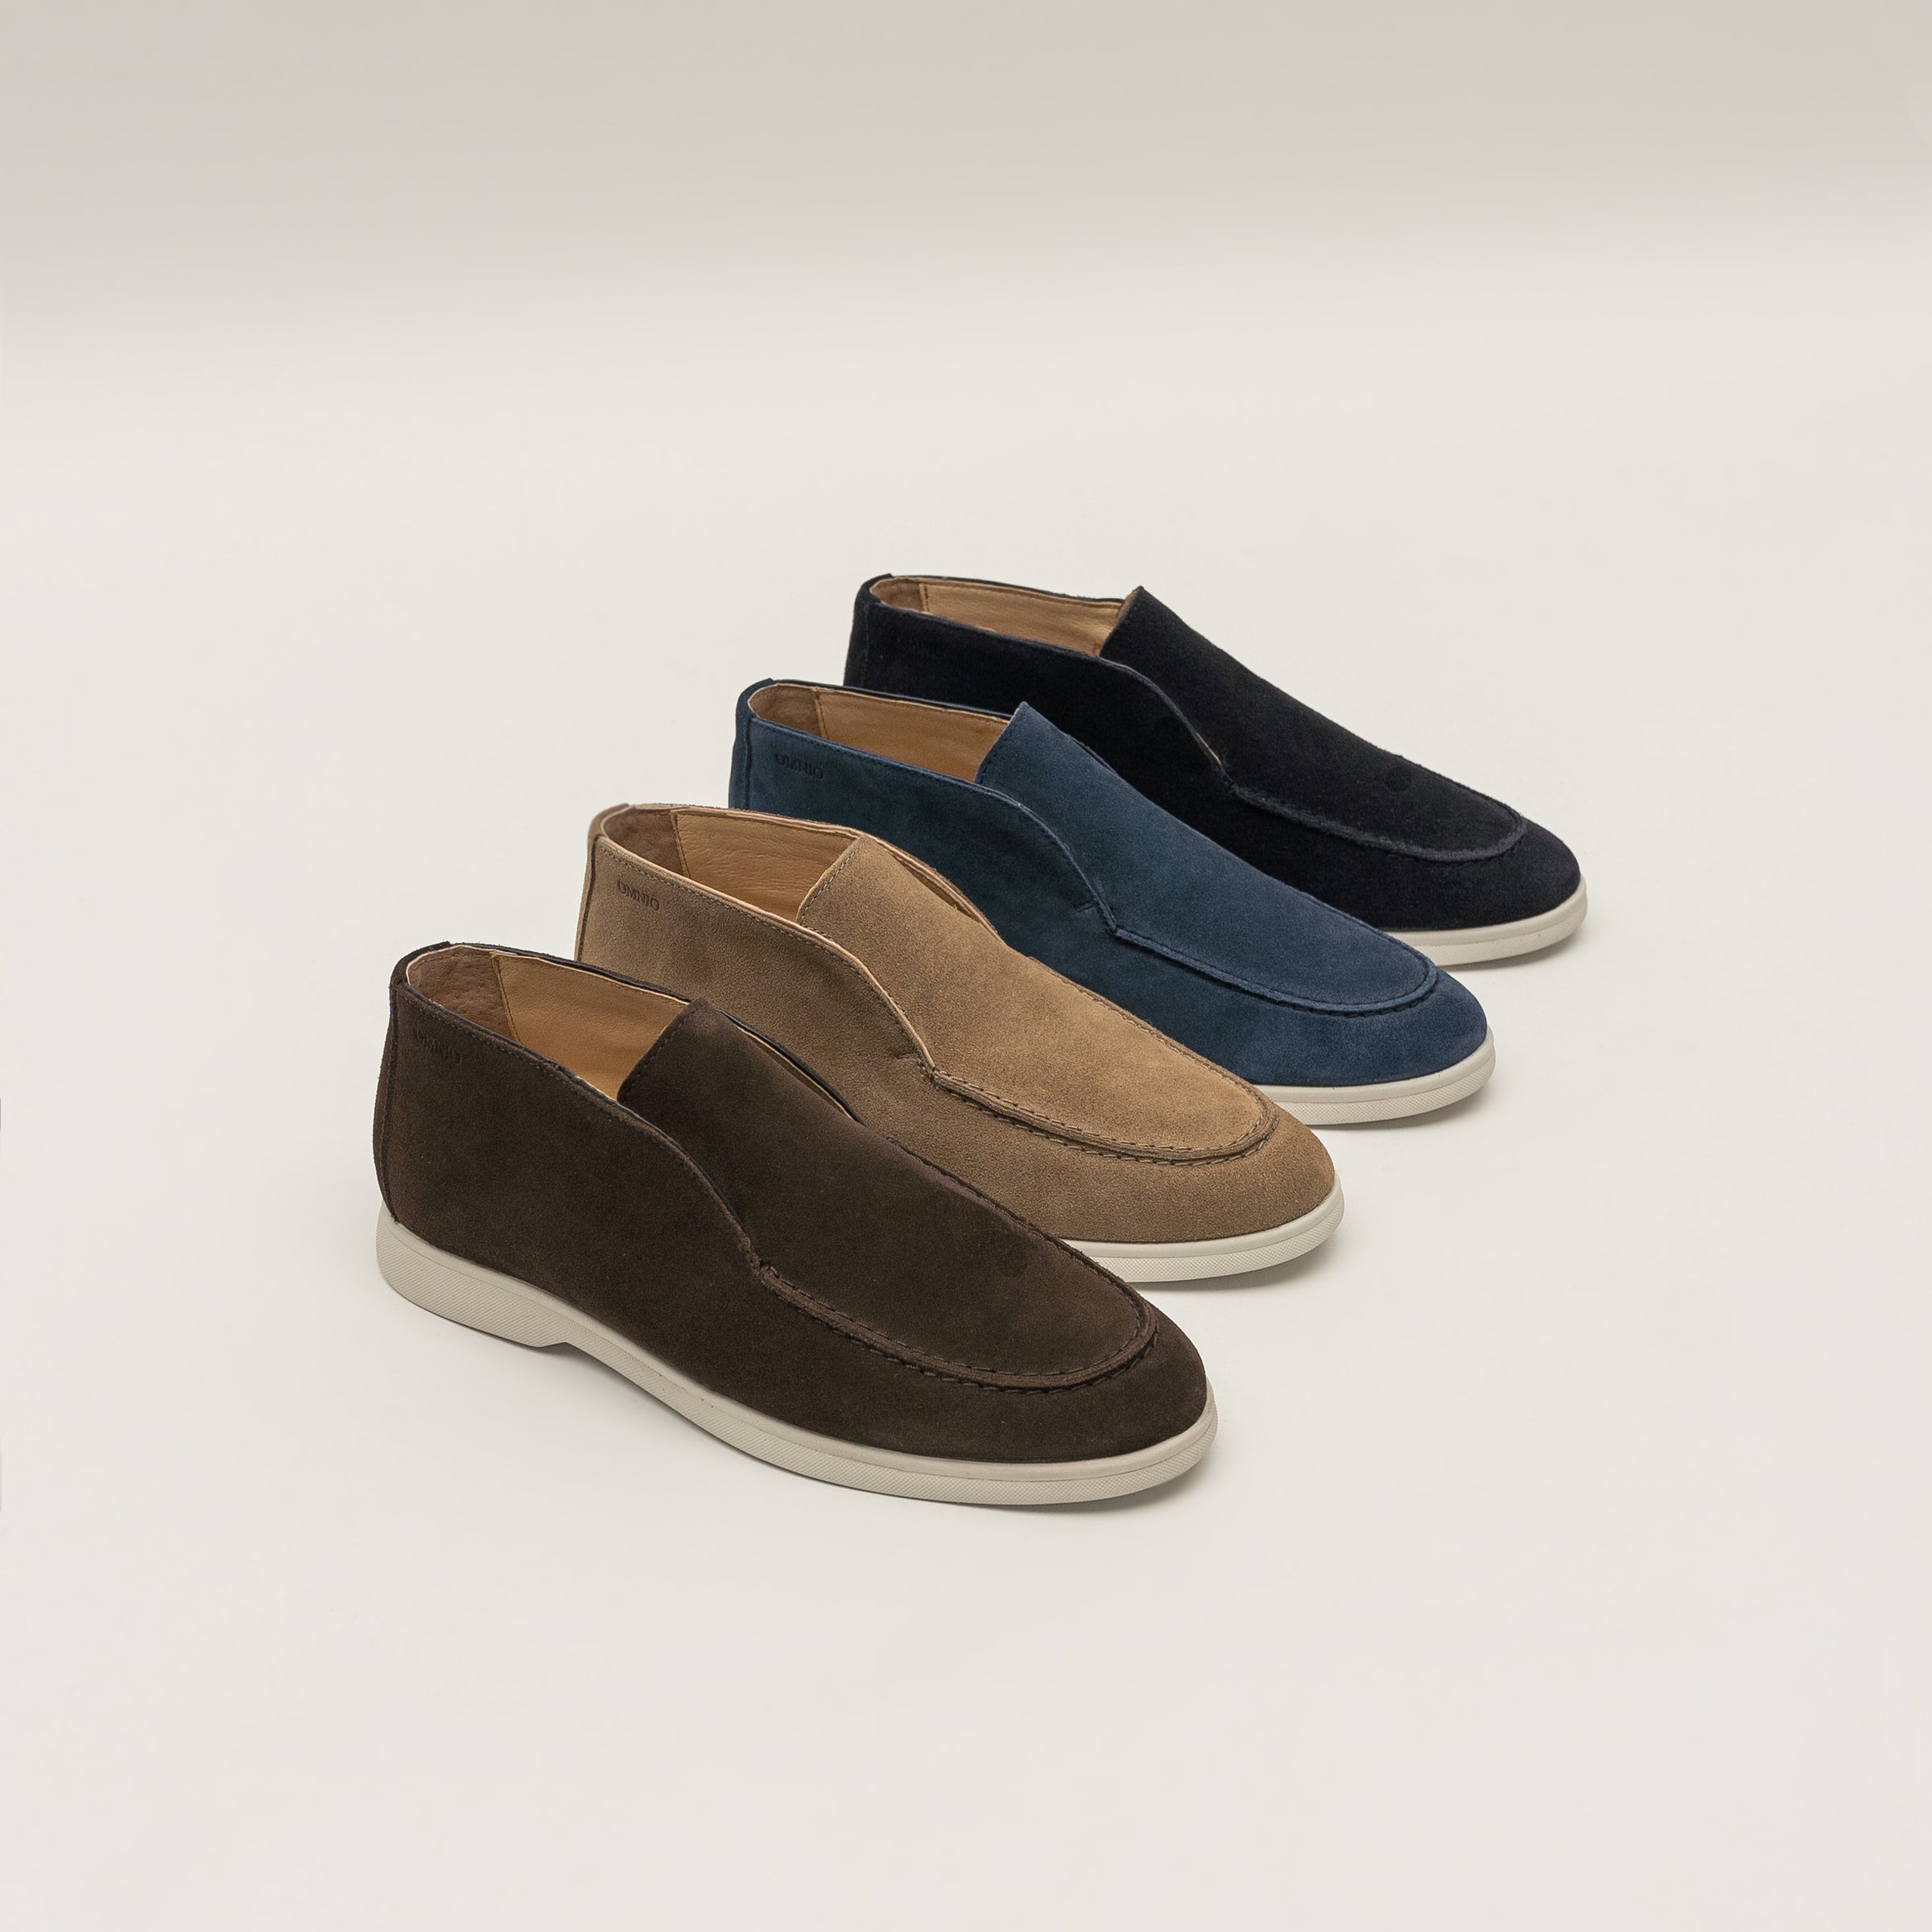 Ace Loafer Selection